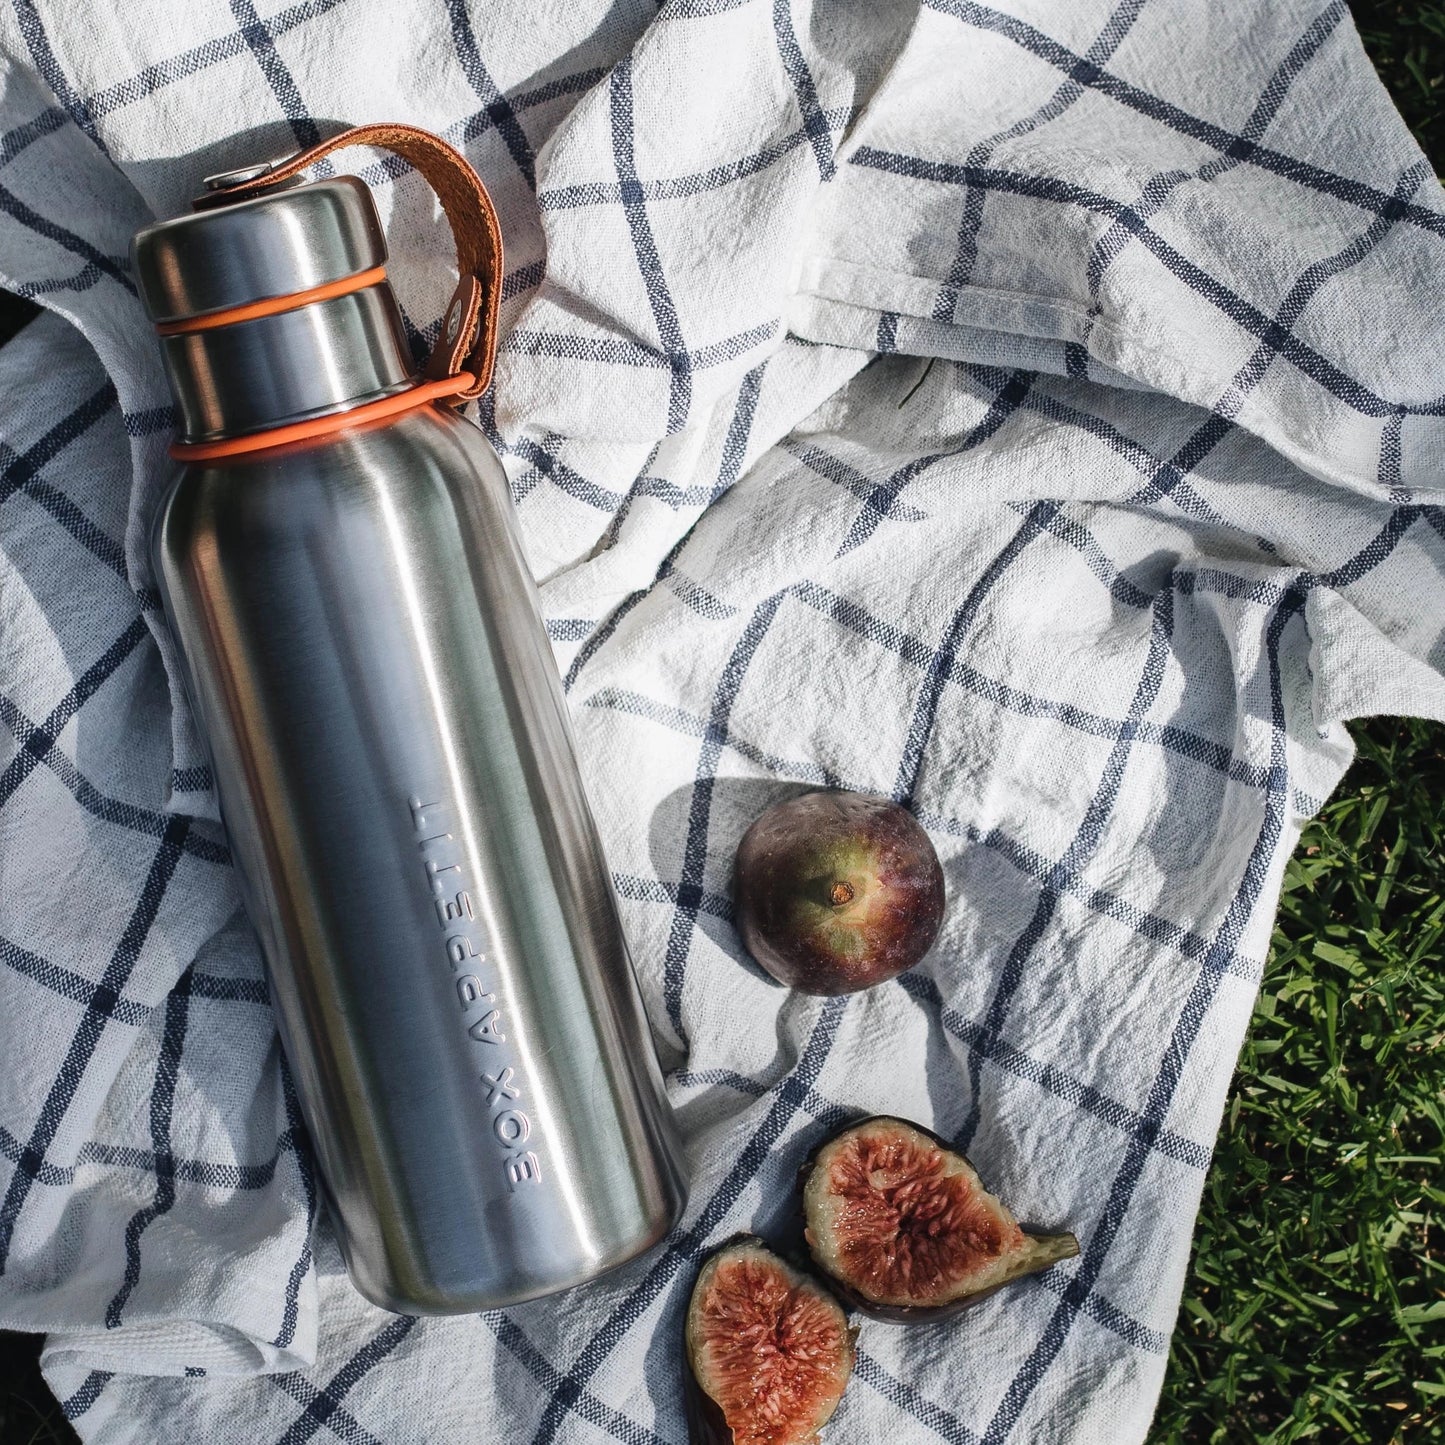 Insulated stainless steel water bottle with vegan leather accent.  Shown at picnic with figs